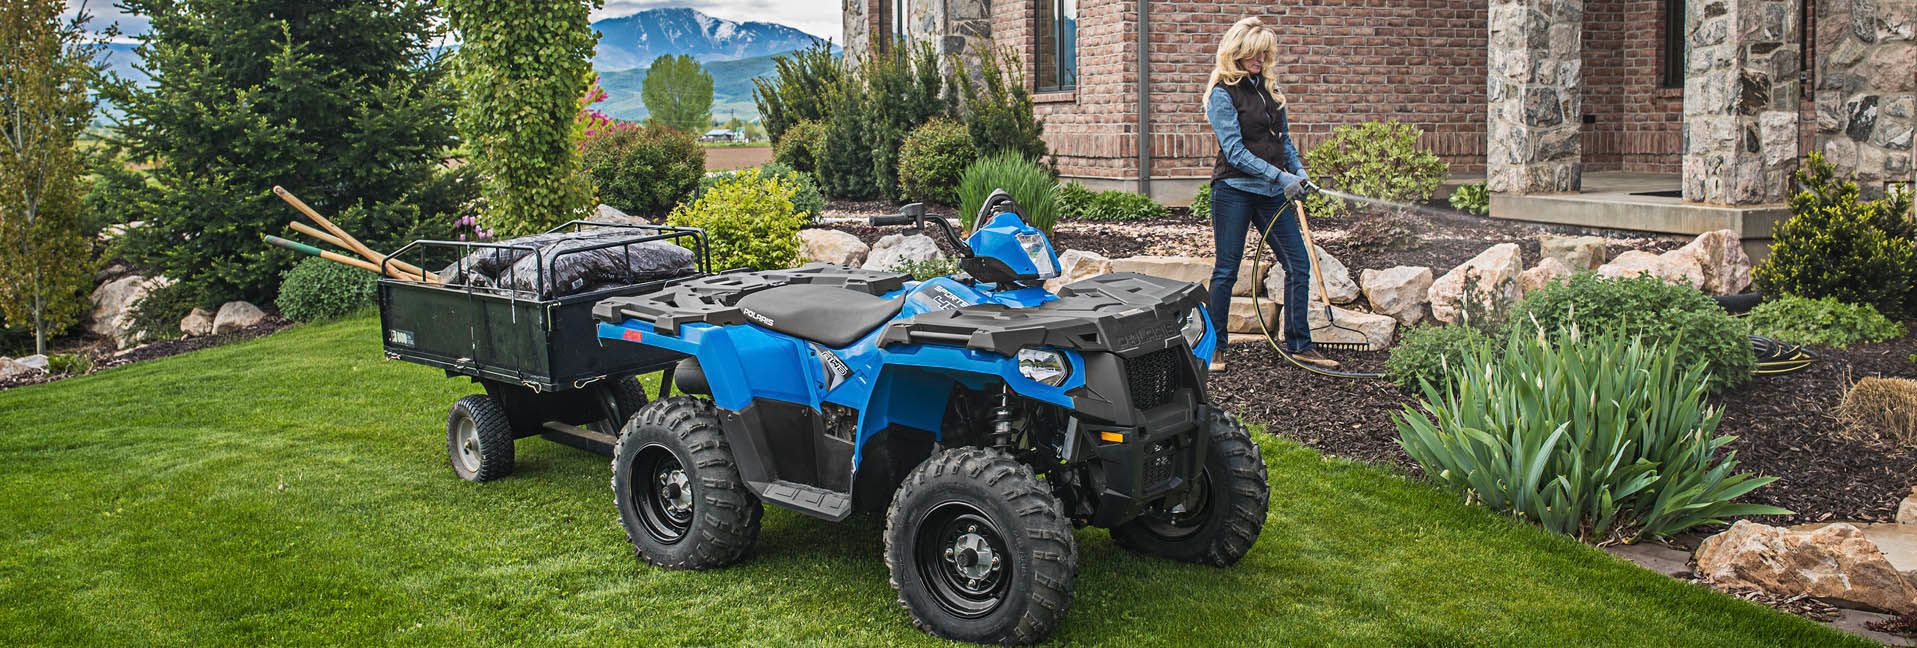 Seven Under Ten-We take a look at some of the industry’s newest and refreshed ATVs under $10,000